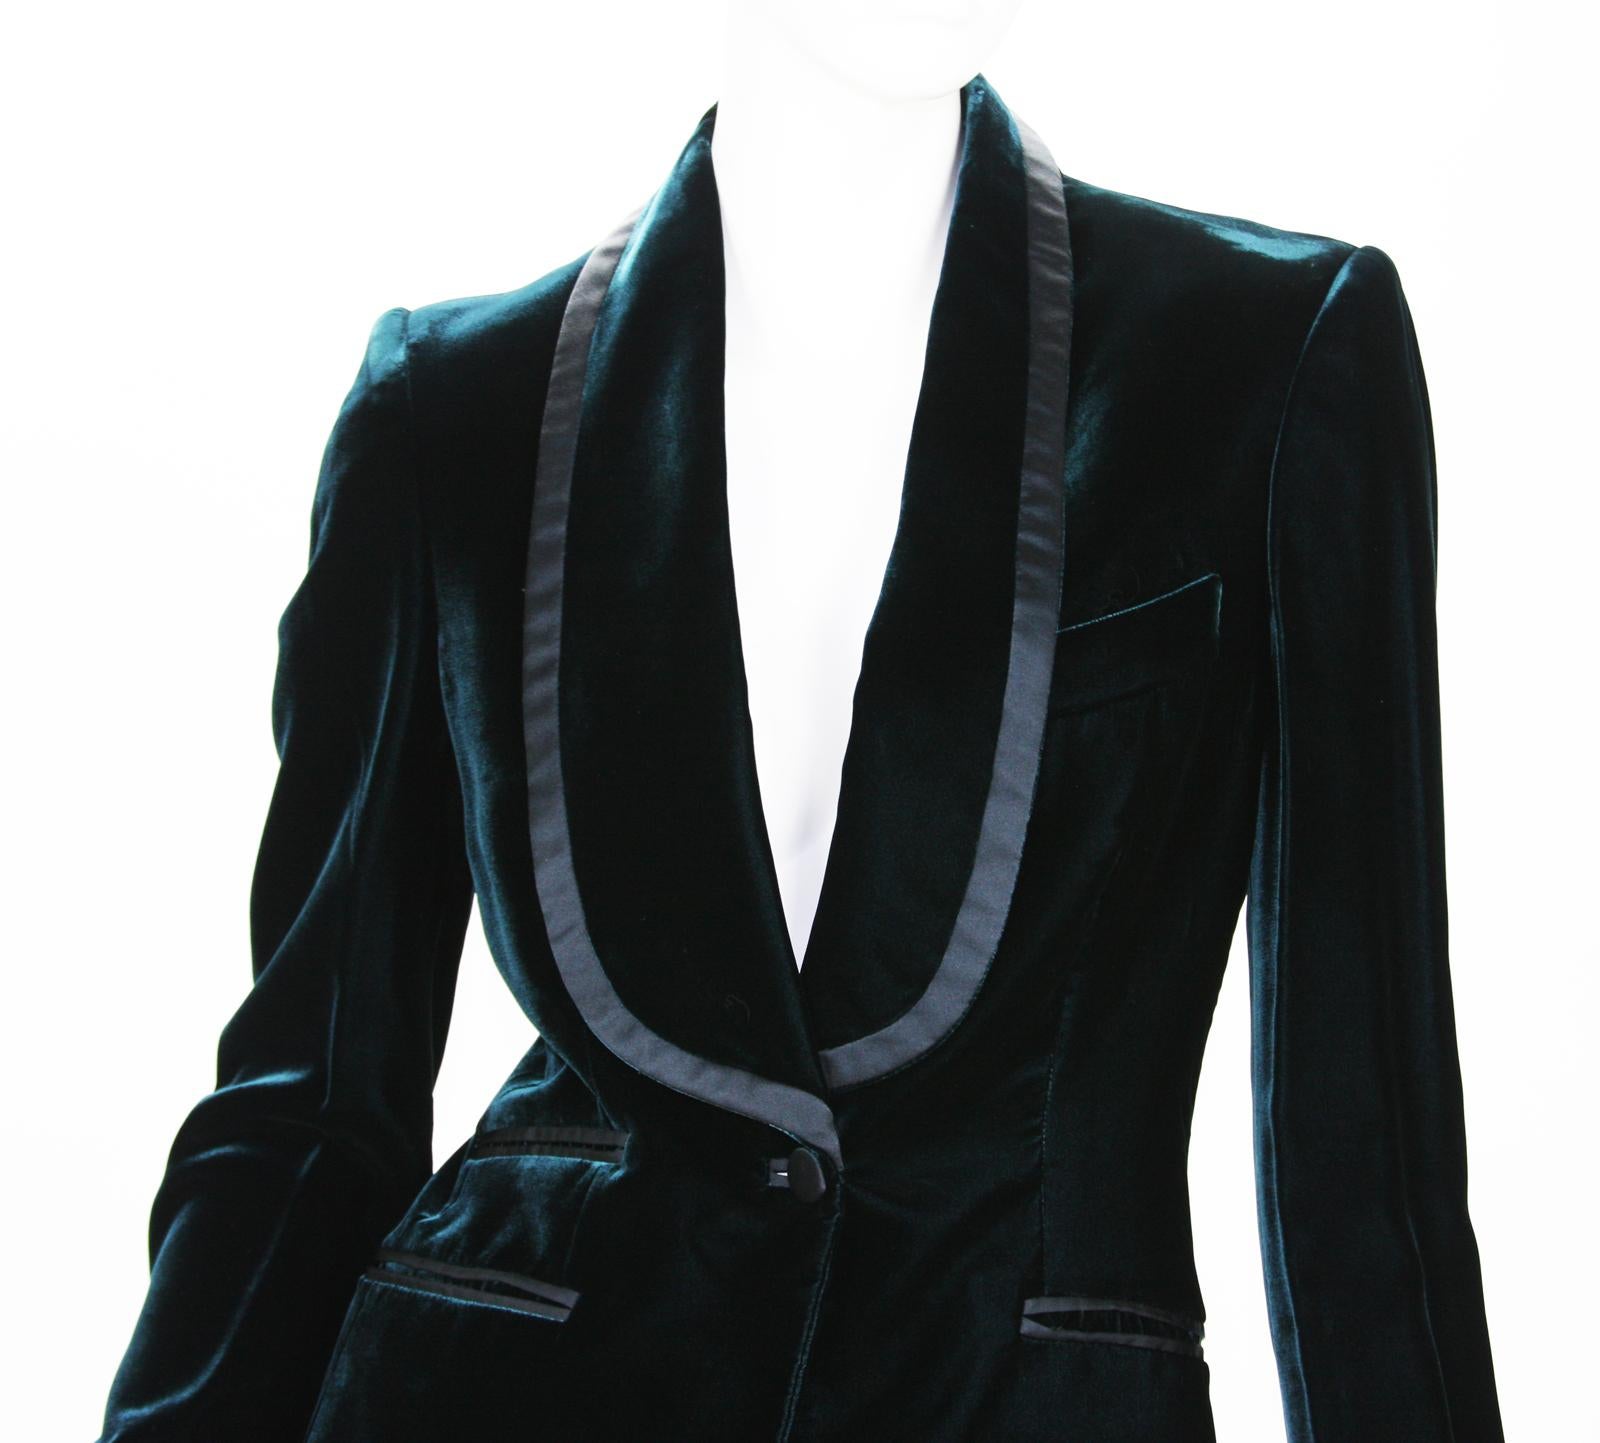 Tom Ford for Gucci Velvet Emerald Green Tuxedo Jacket
F/W 2004 Final Tom Ford Runway Collection for Gucci
Designer size 38
Emerald Green Color, Shawl Collar, Black Satin Trim, Single Button Closure, Fully Lined, 4 Pockets.
Measurements approx.: